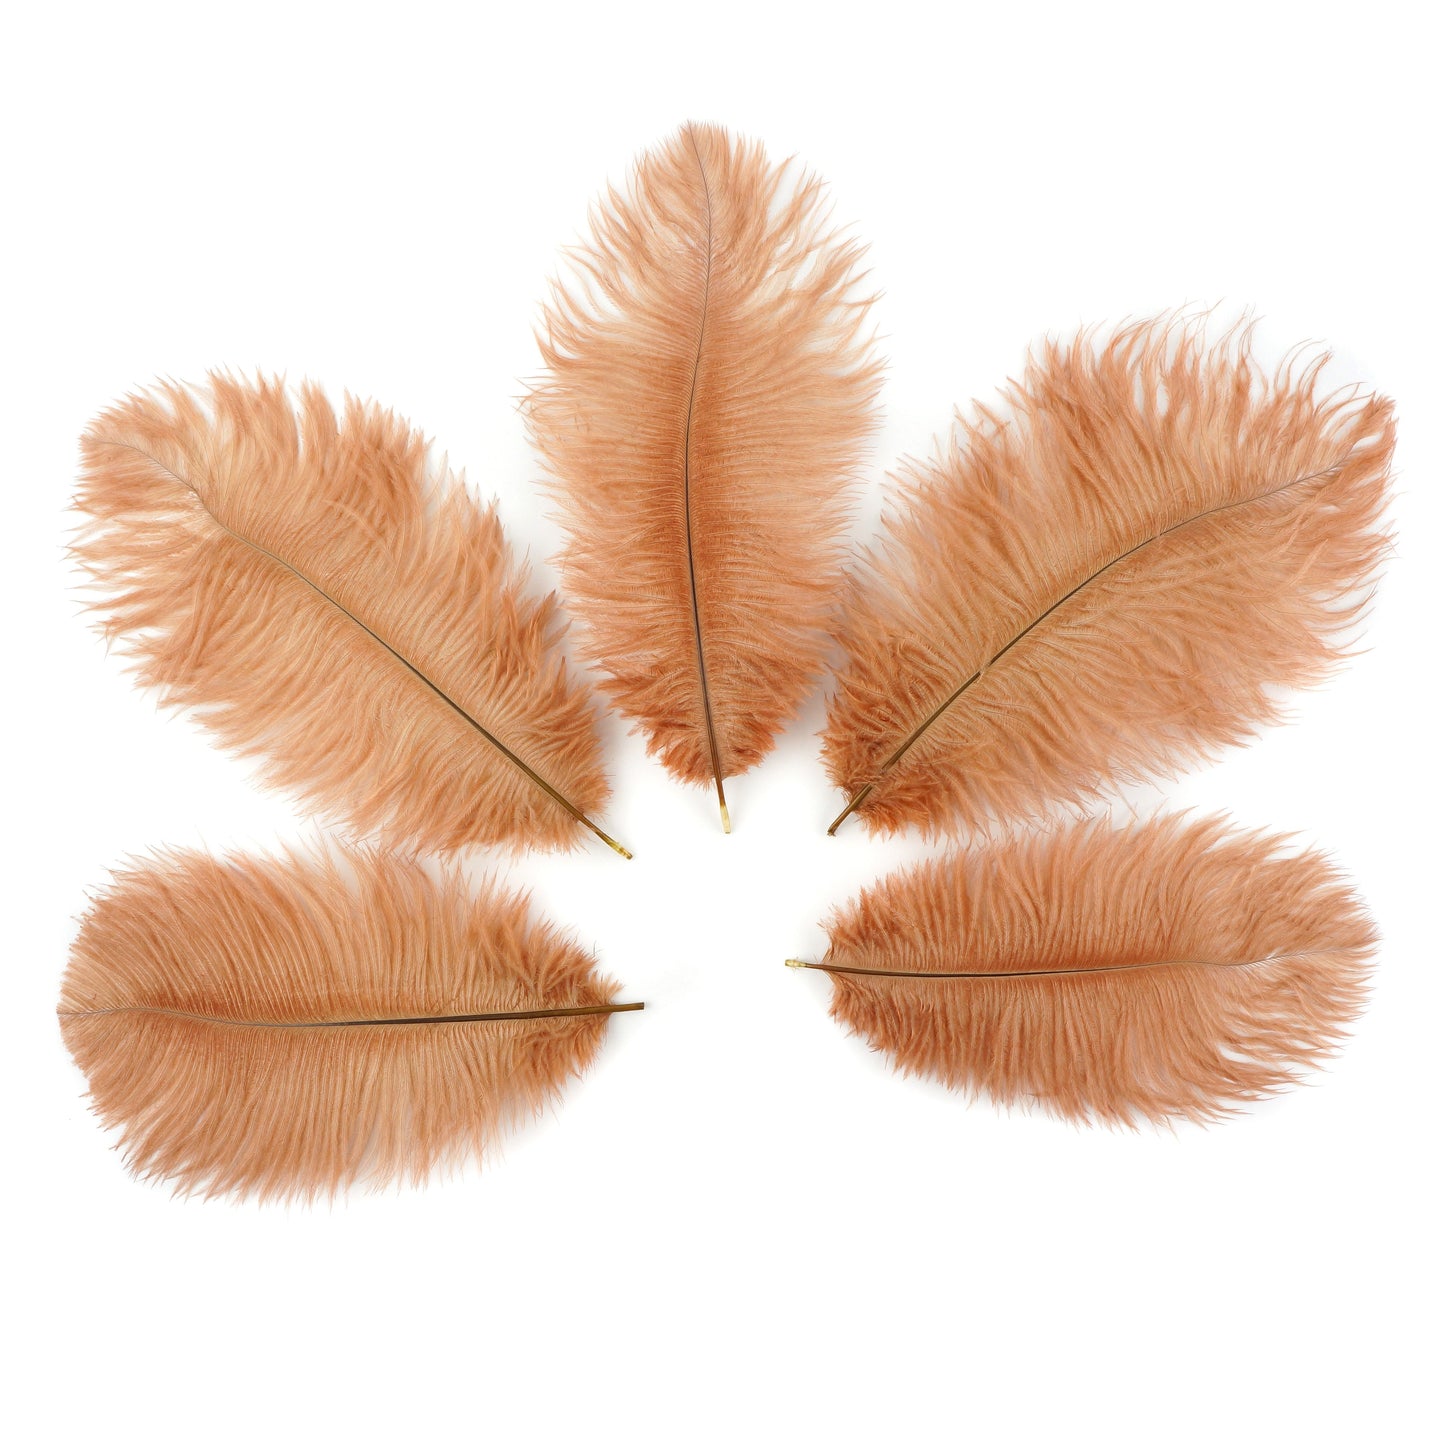 Ostrich Feathers 4-8" Drabs - Cinnamon